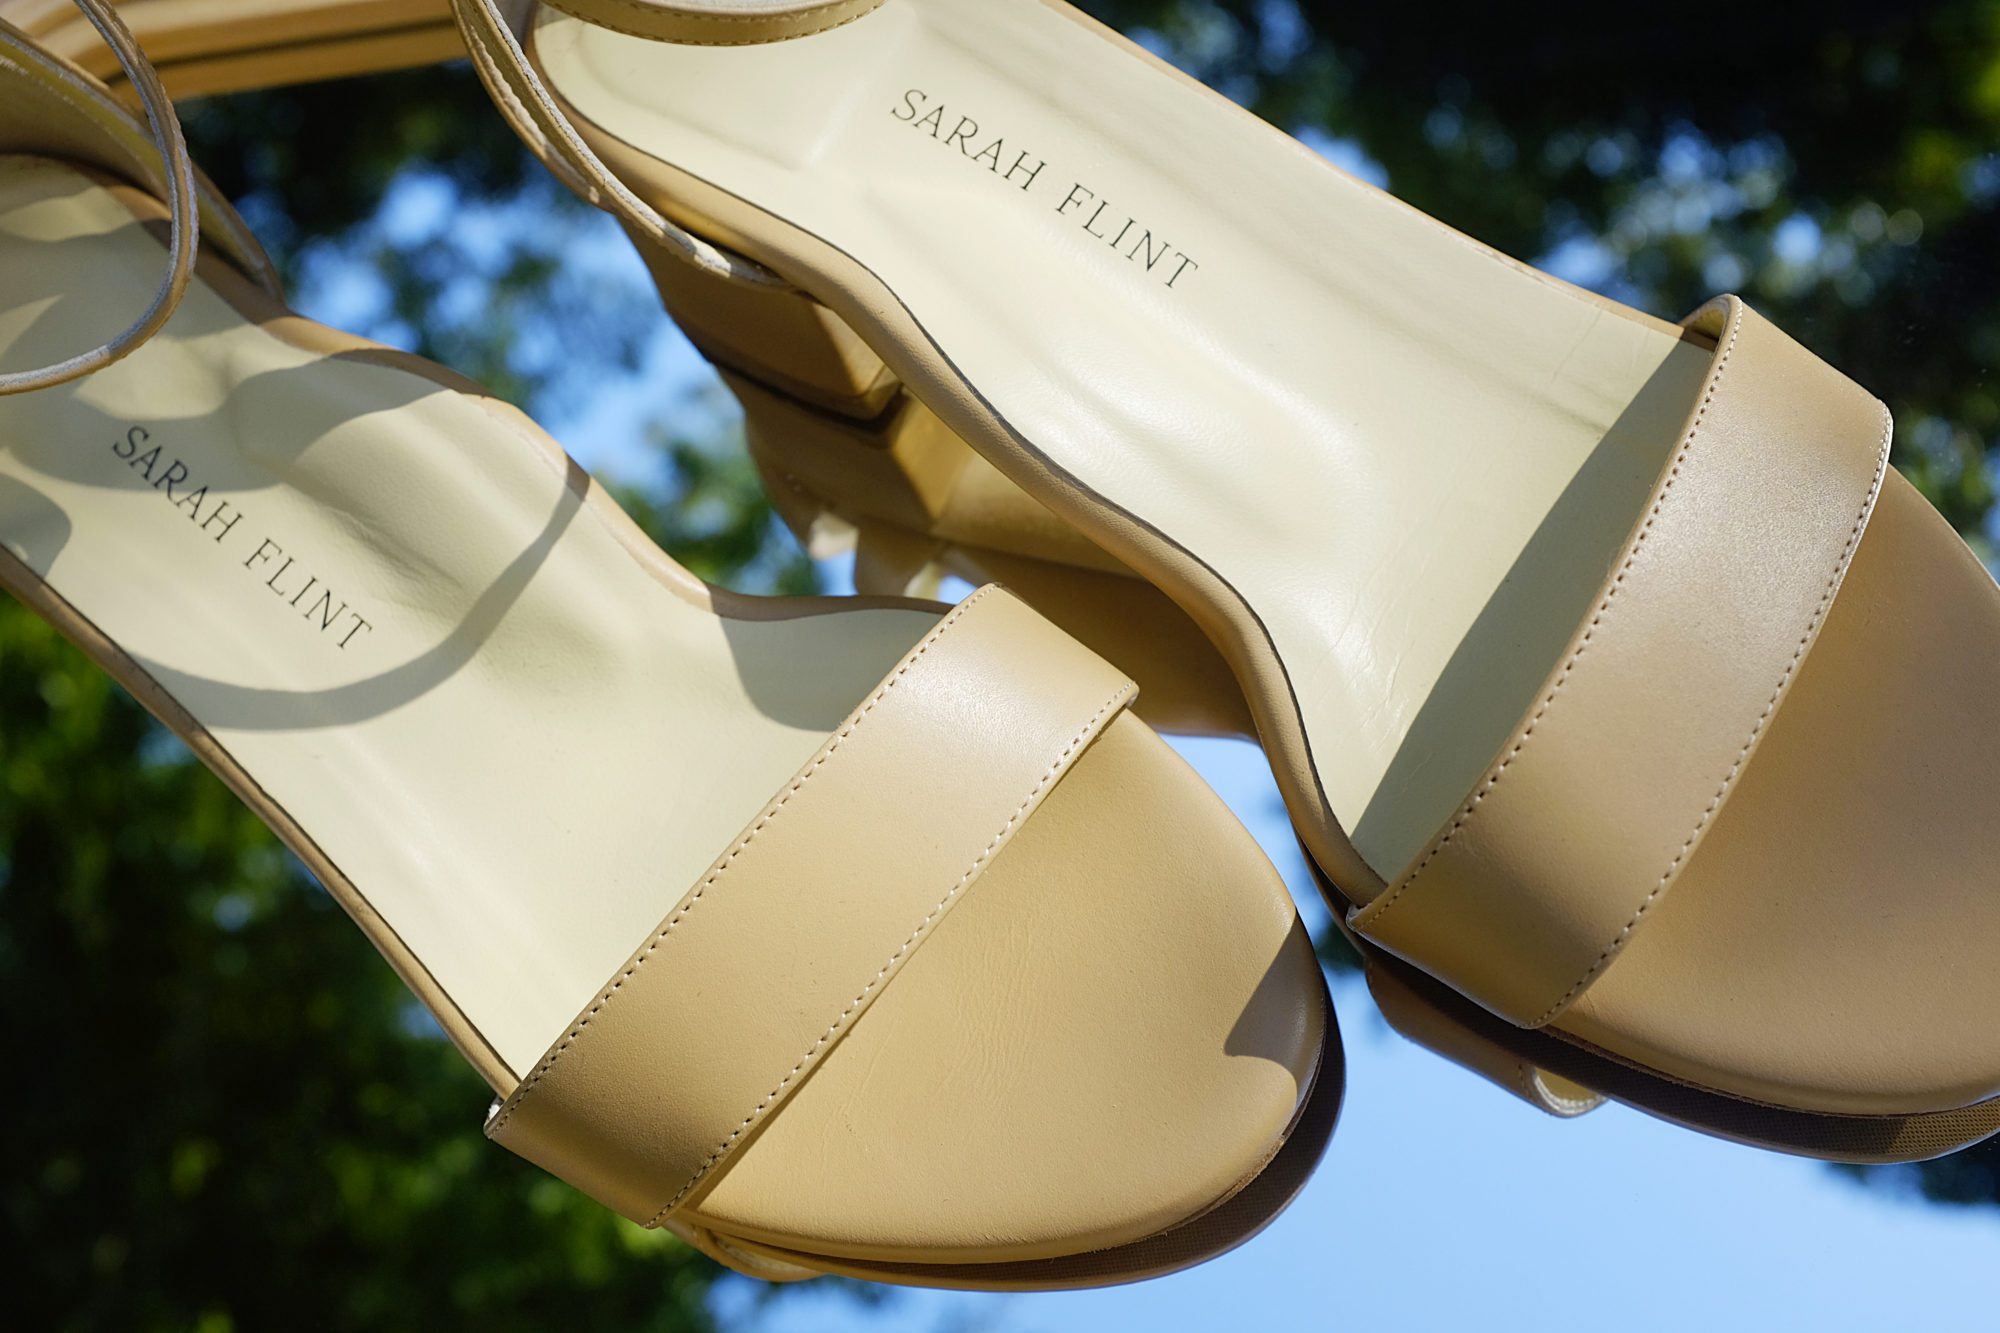 The Perfect Block Sandals from Sarah Flint sit on a mirror